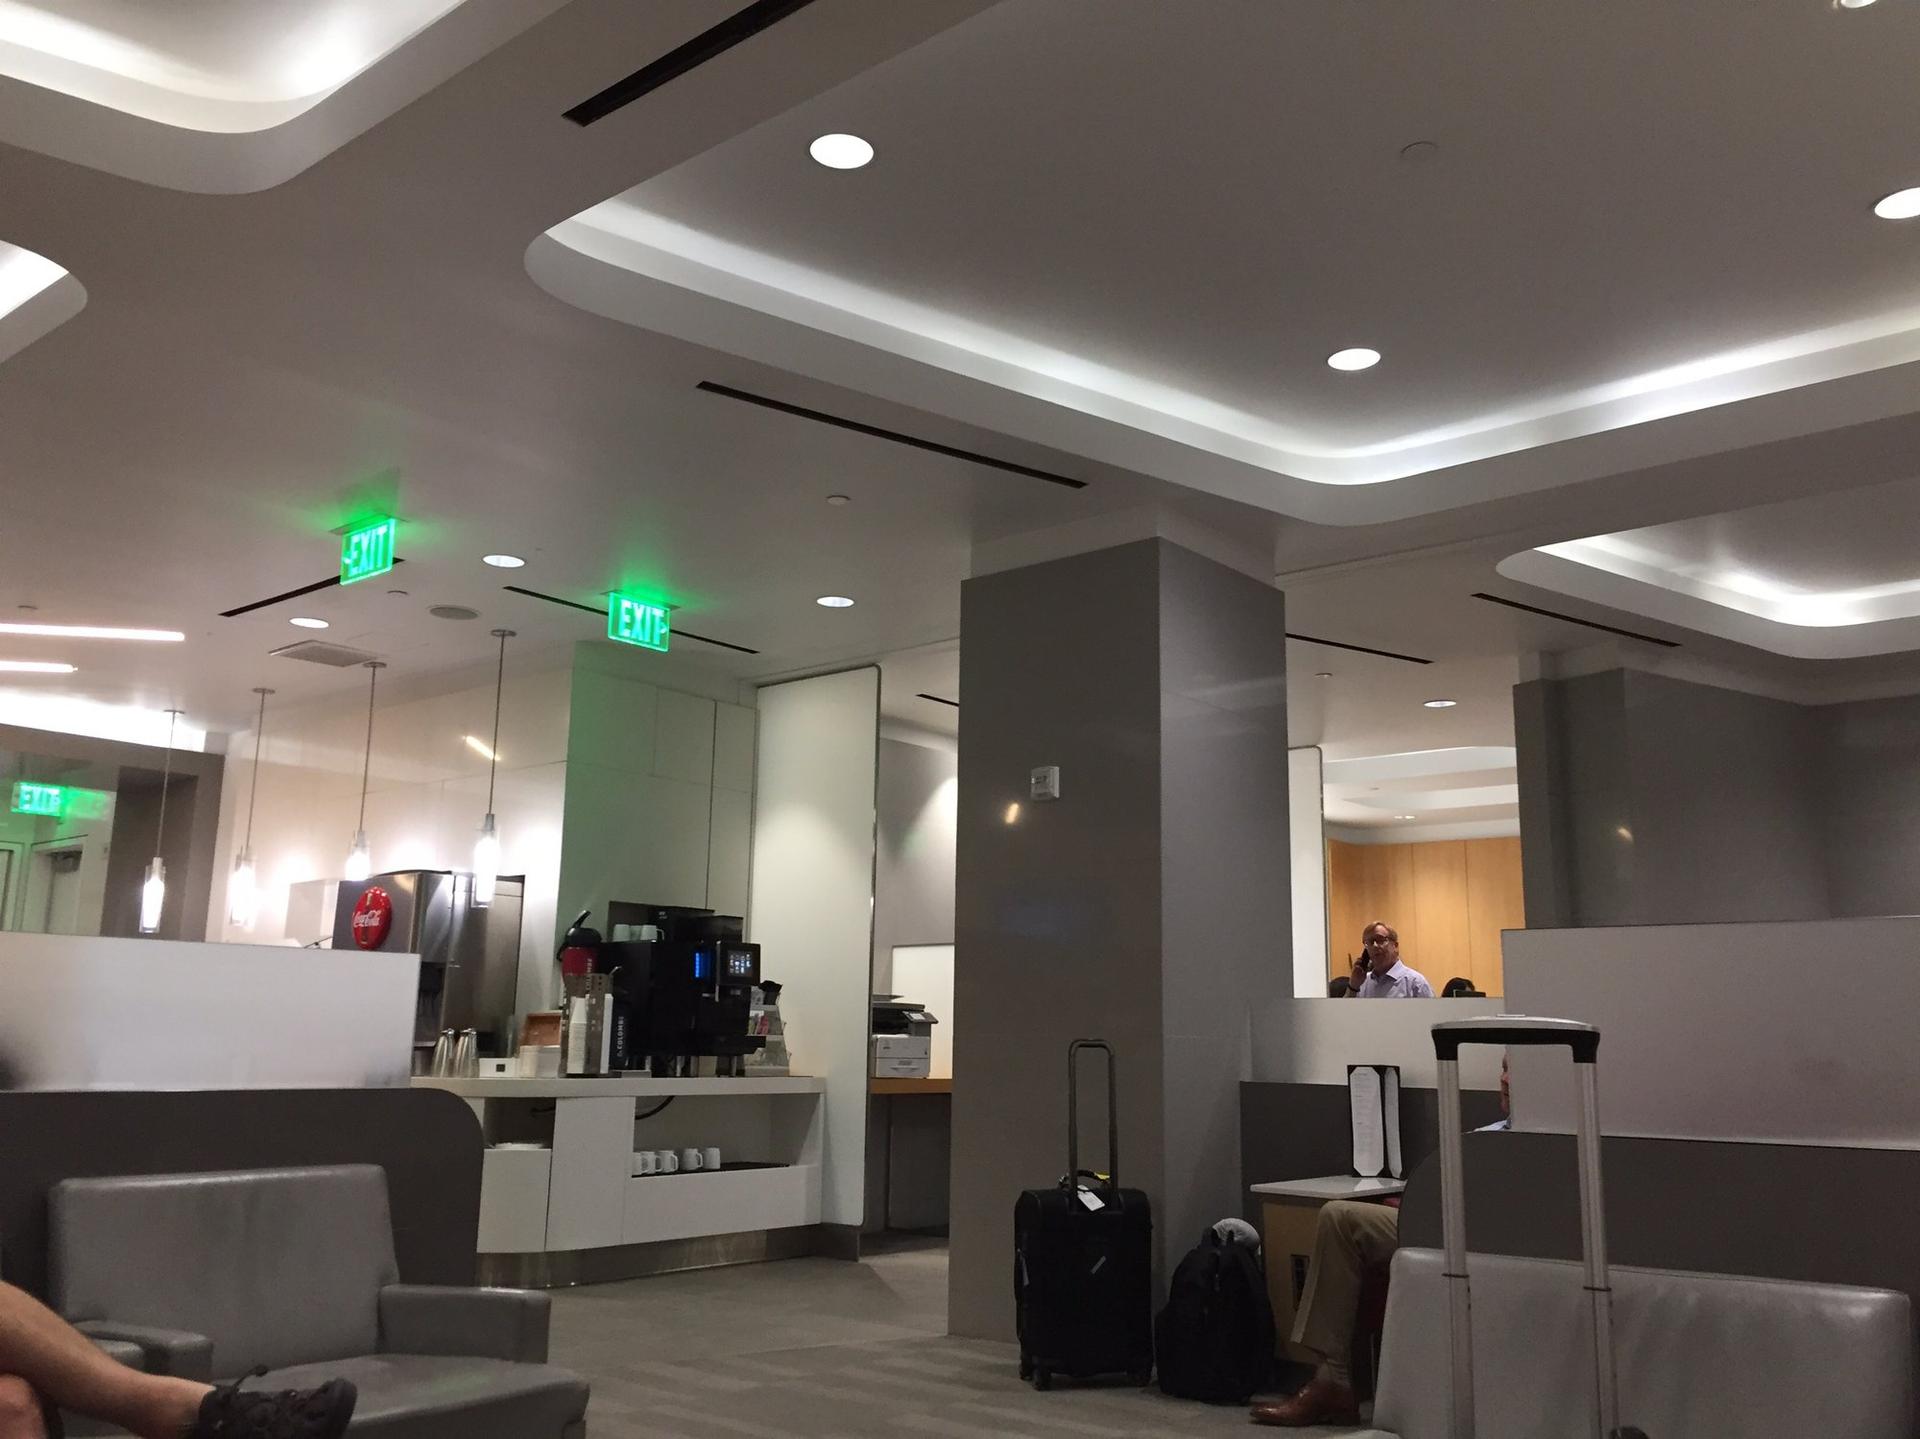 American Airlines Admirals Club image 30 of 43